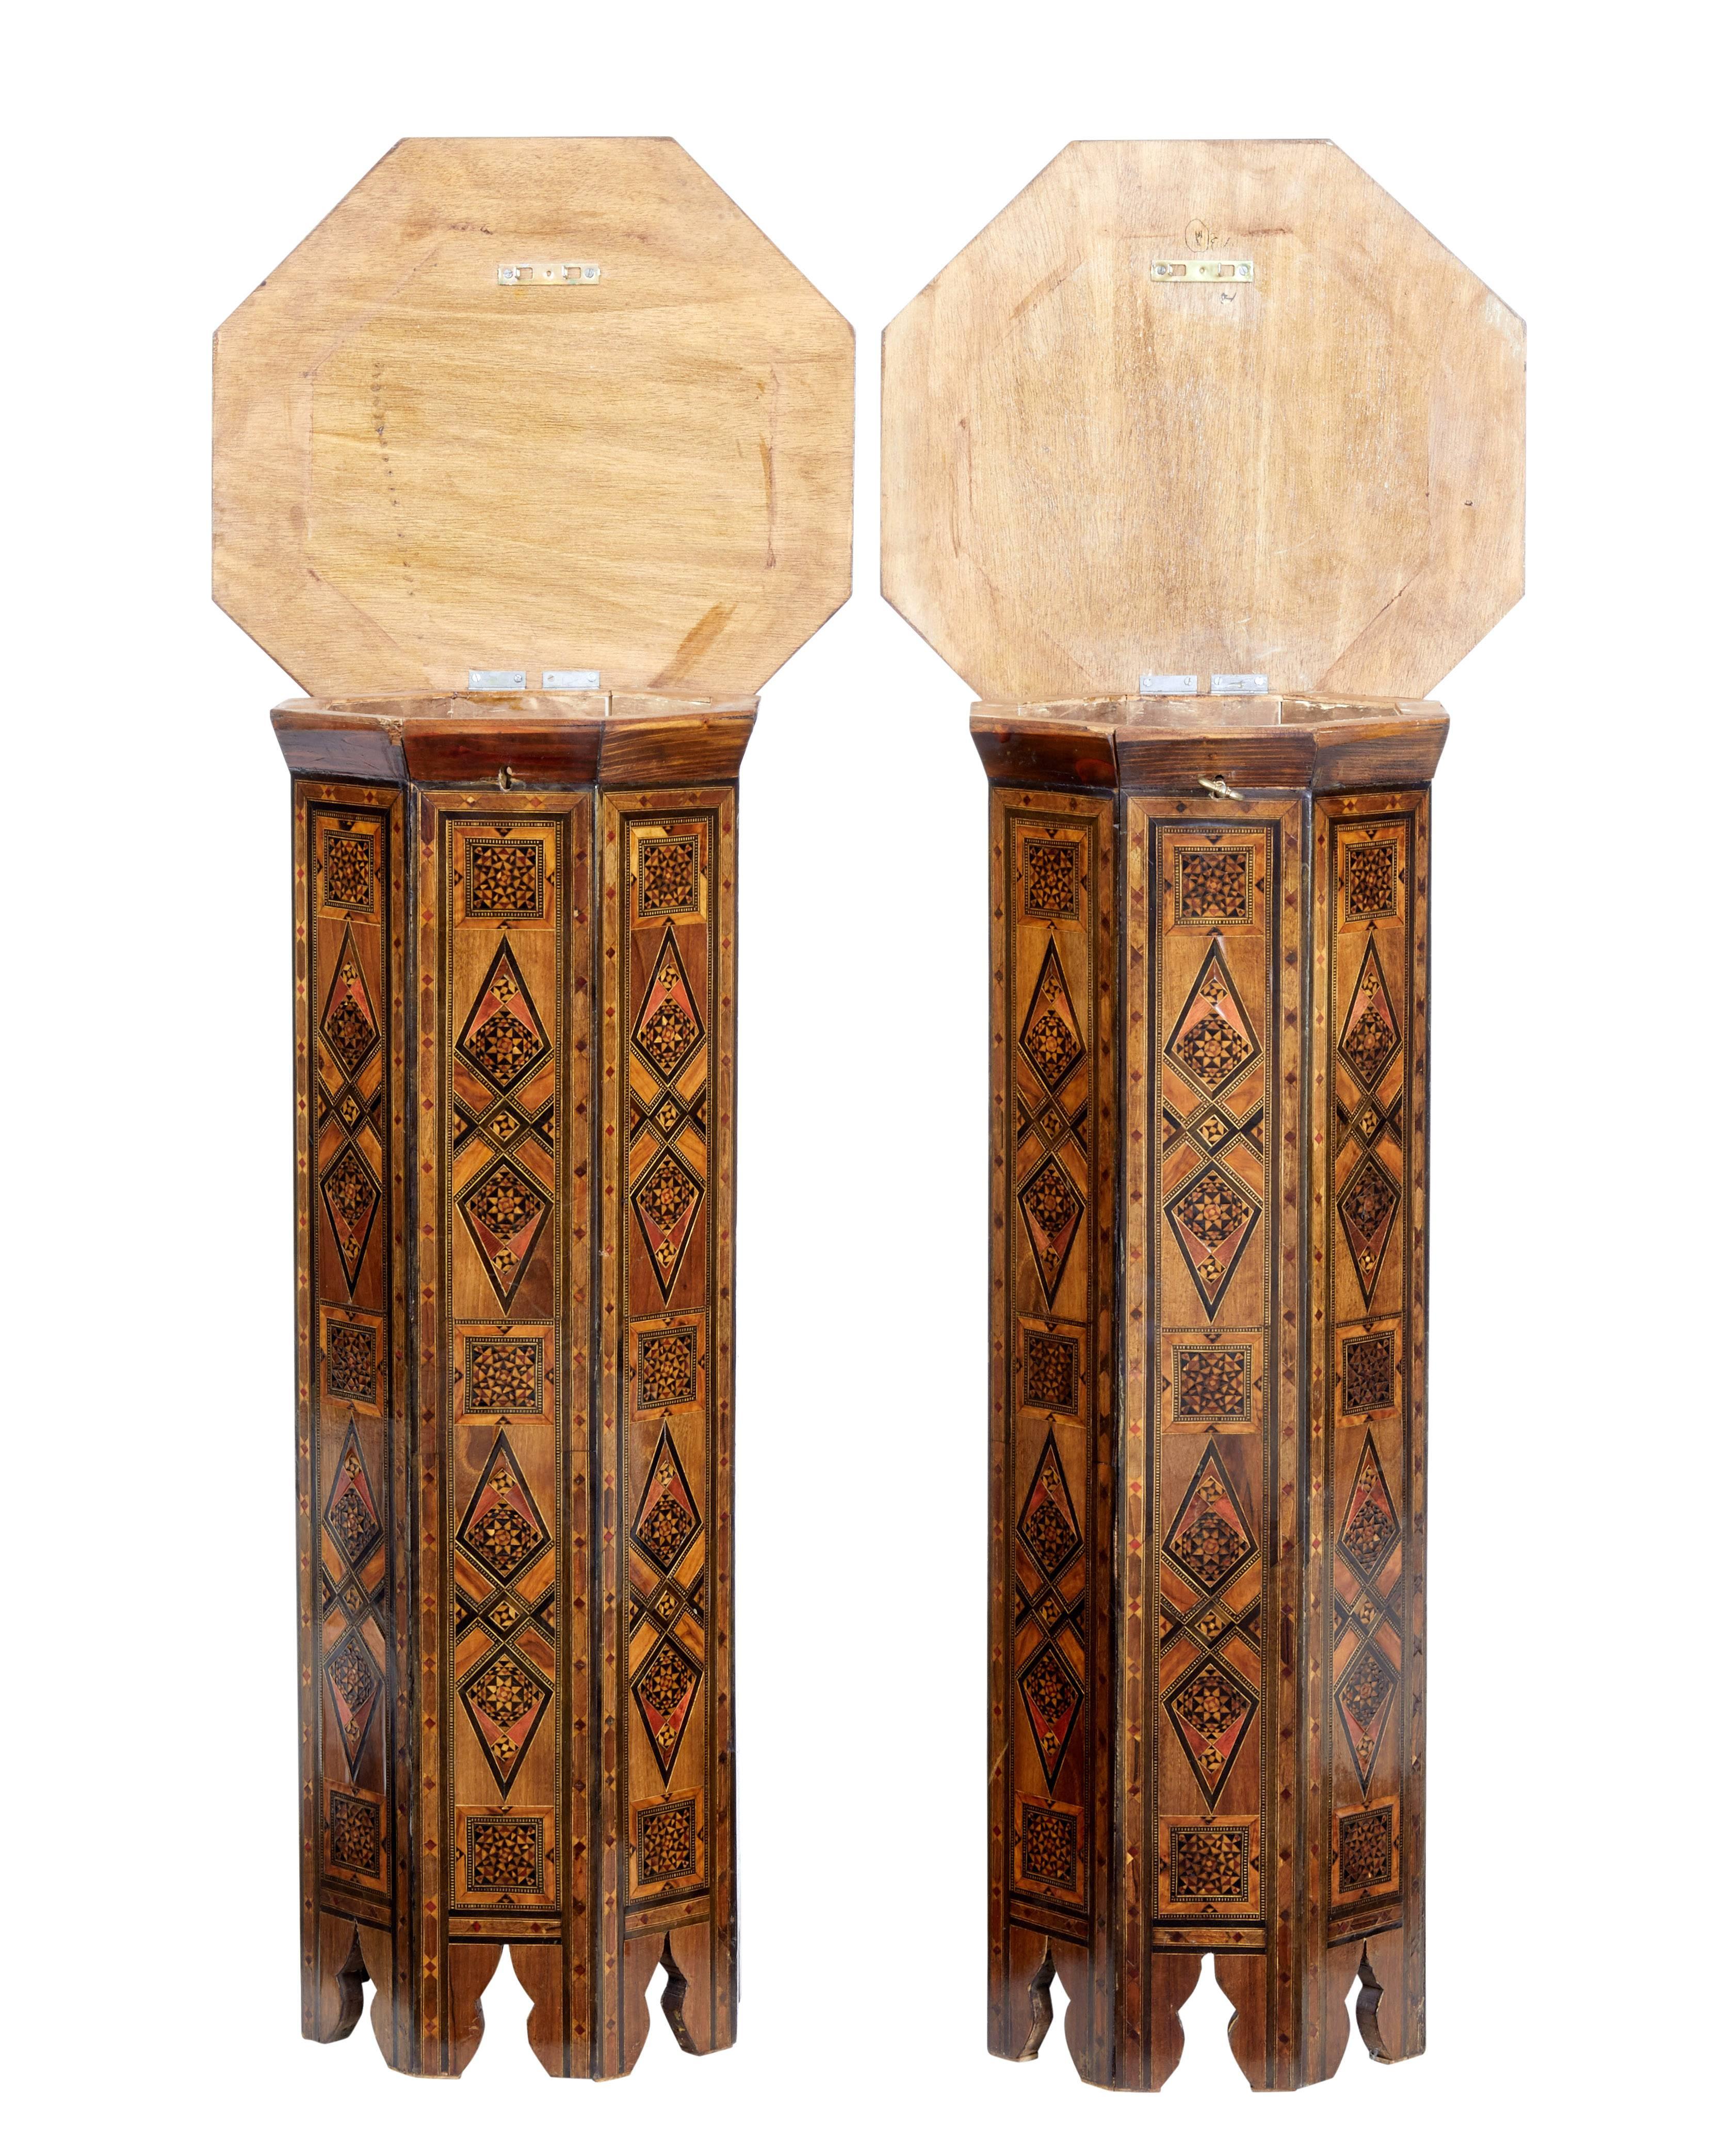 Pair of profusely inlaid Damascan pedestals, circa 1920.

Later converted with hinged tops to allow storage inside. Lids lock with key.

Octagonal top inlaid with various exotic woods and mother-of-pearl.

Surface marks and minor losses.